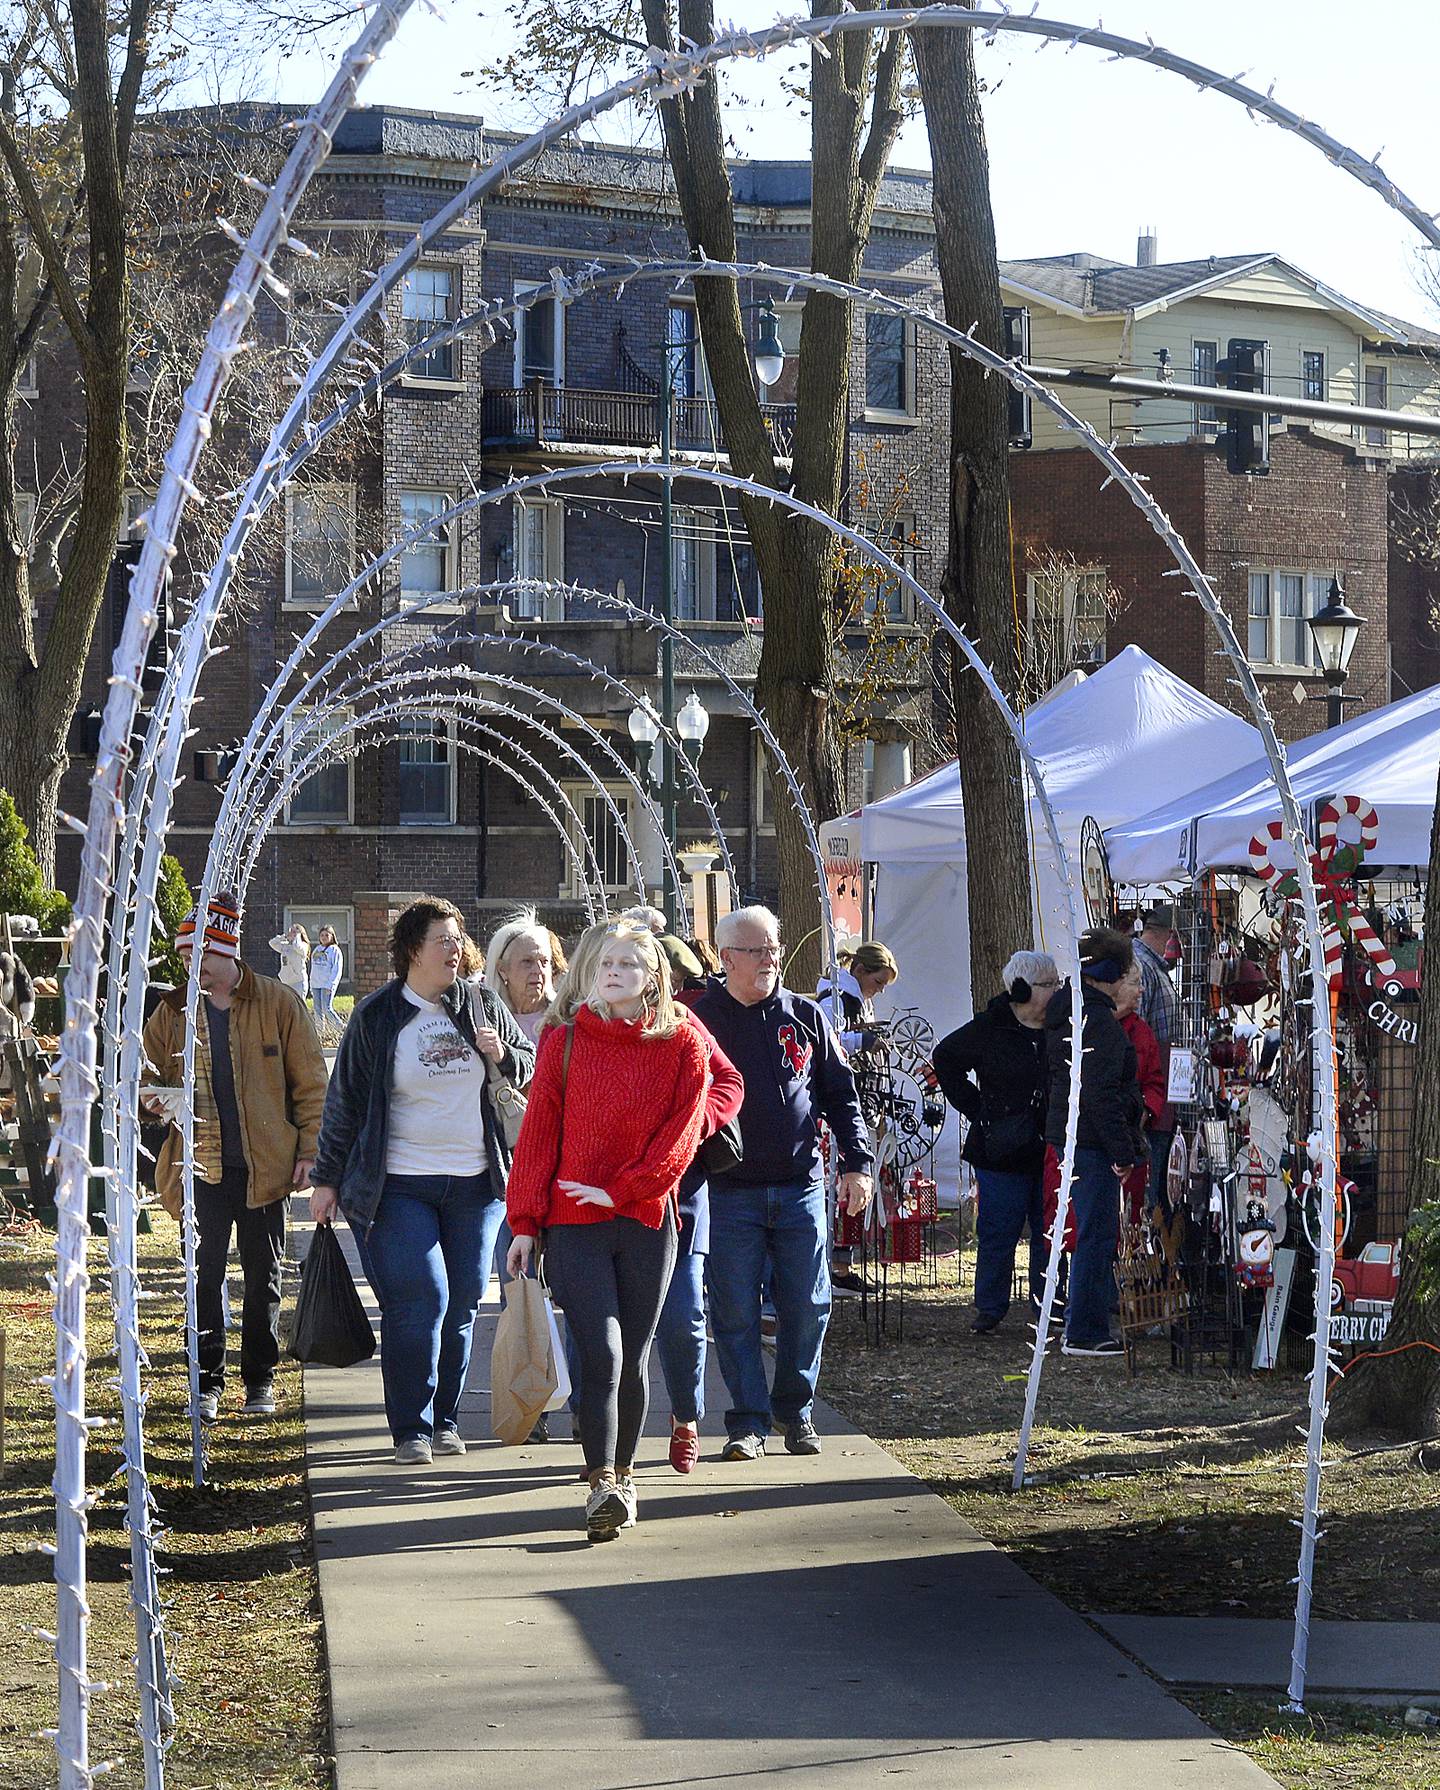 Christmas shopping also took place at Washington Square as gift and food vendors set up shop as part of the Chris Kringle Market Saturday, Nov. 26, 2022, in Ottawa.